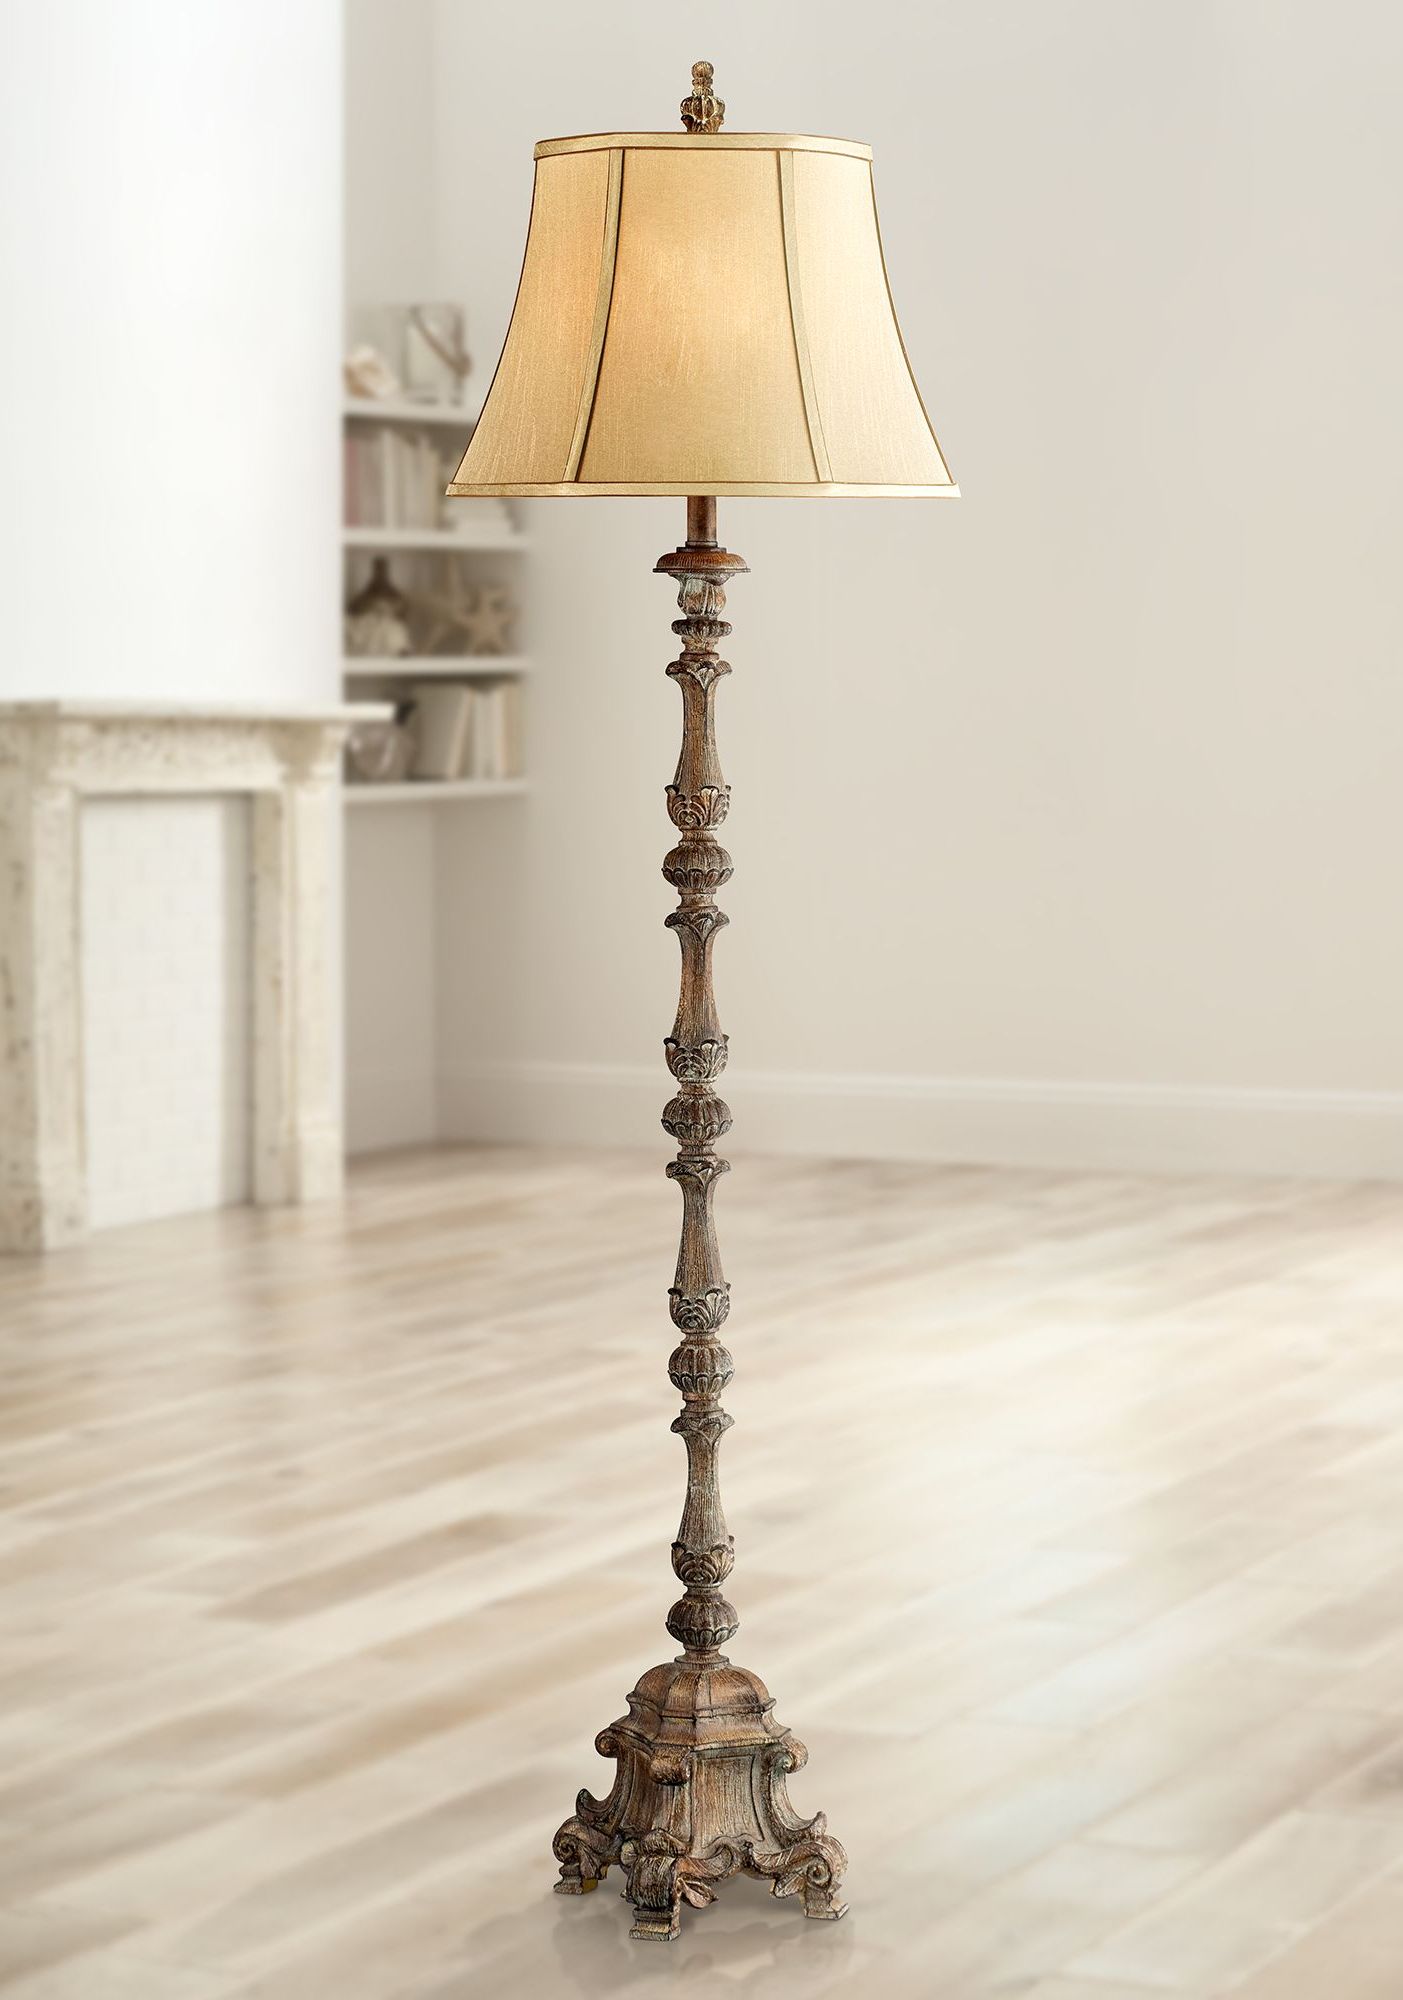 Regency Hill Rustic Floor Lamp 62" Tall French Faux Wood Antique  Candlestick Beige Silk Bell Shade For Living Room Reading Bedroom Office –  Walmart Pertaining To Rustic Floor Lamps (View 7 of 20)